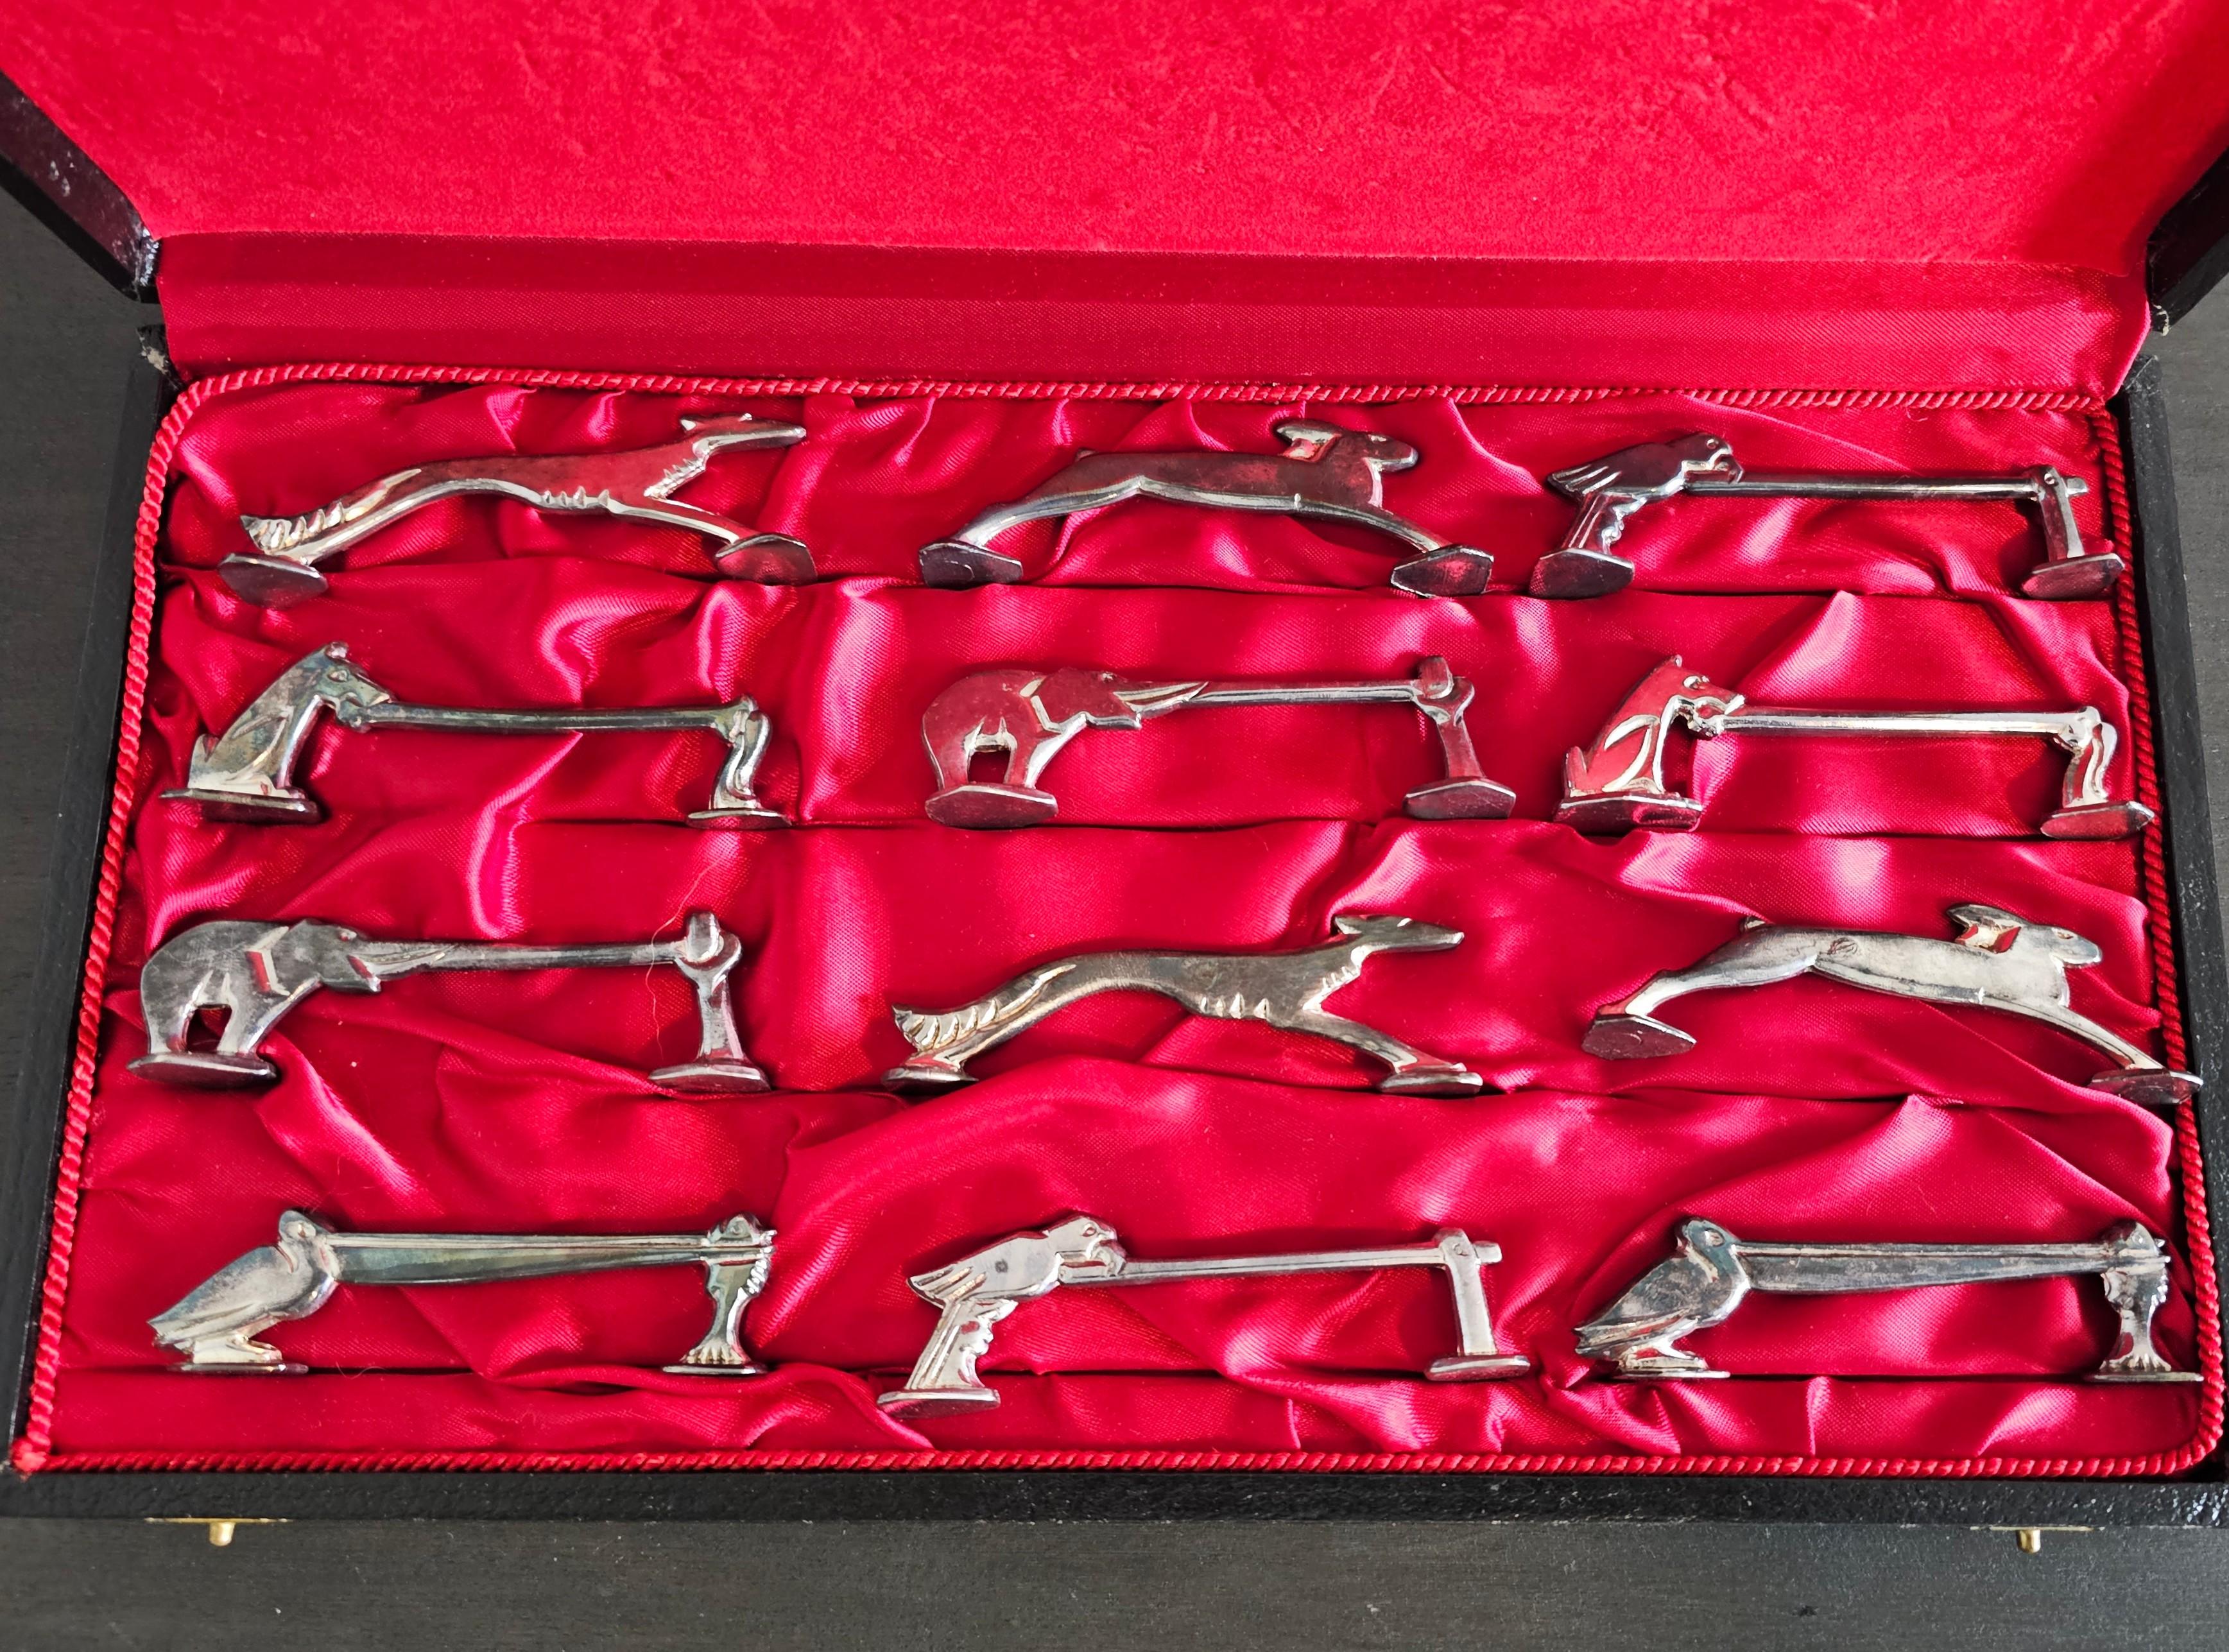 Add a touch of whimsical elegance and sophistication to your dinner party with this boxed set of twelve fine French Art Deco silver plated figural animal knife rests. circa 1930s

Born in France in the early/mid-20th century, styled in the manner